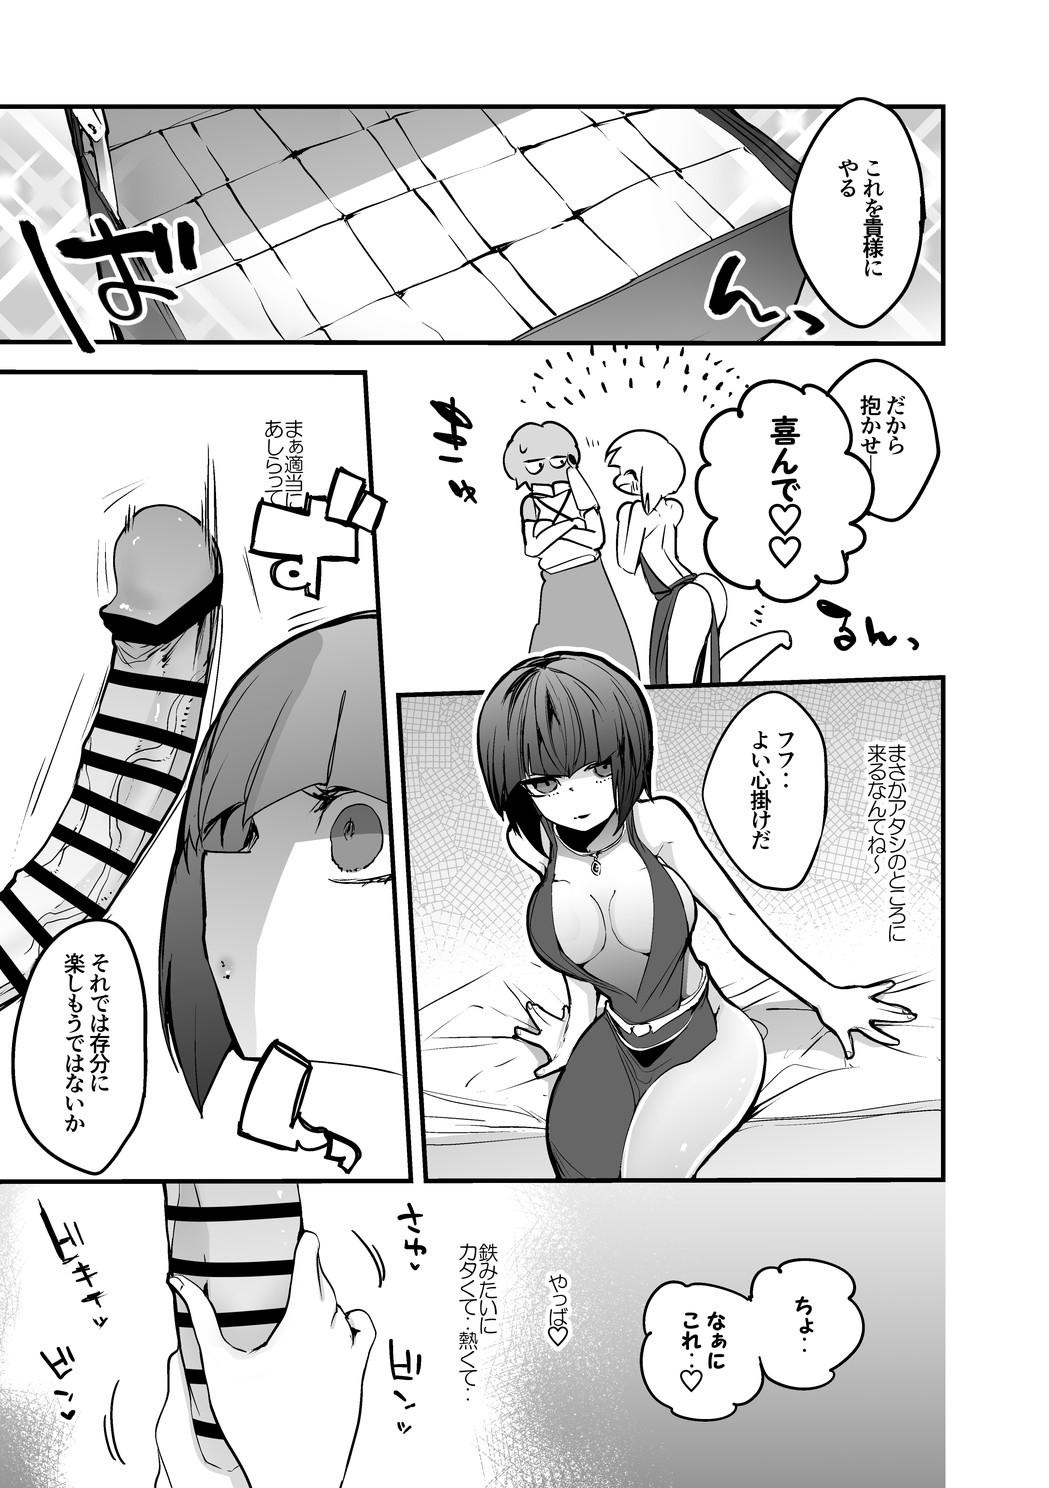 Free Amateur なびきは許しちゃう編 - Ranma 12 Lingerie - Page 2